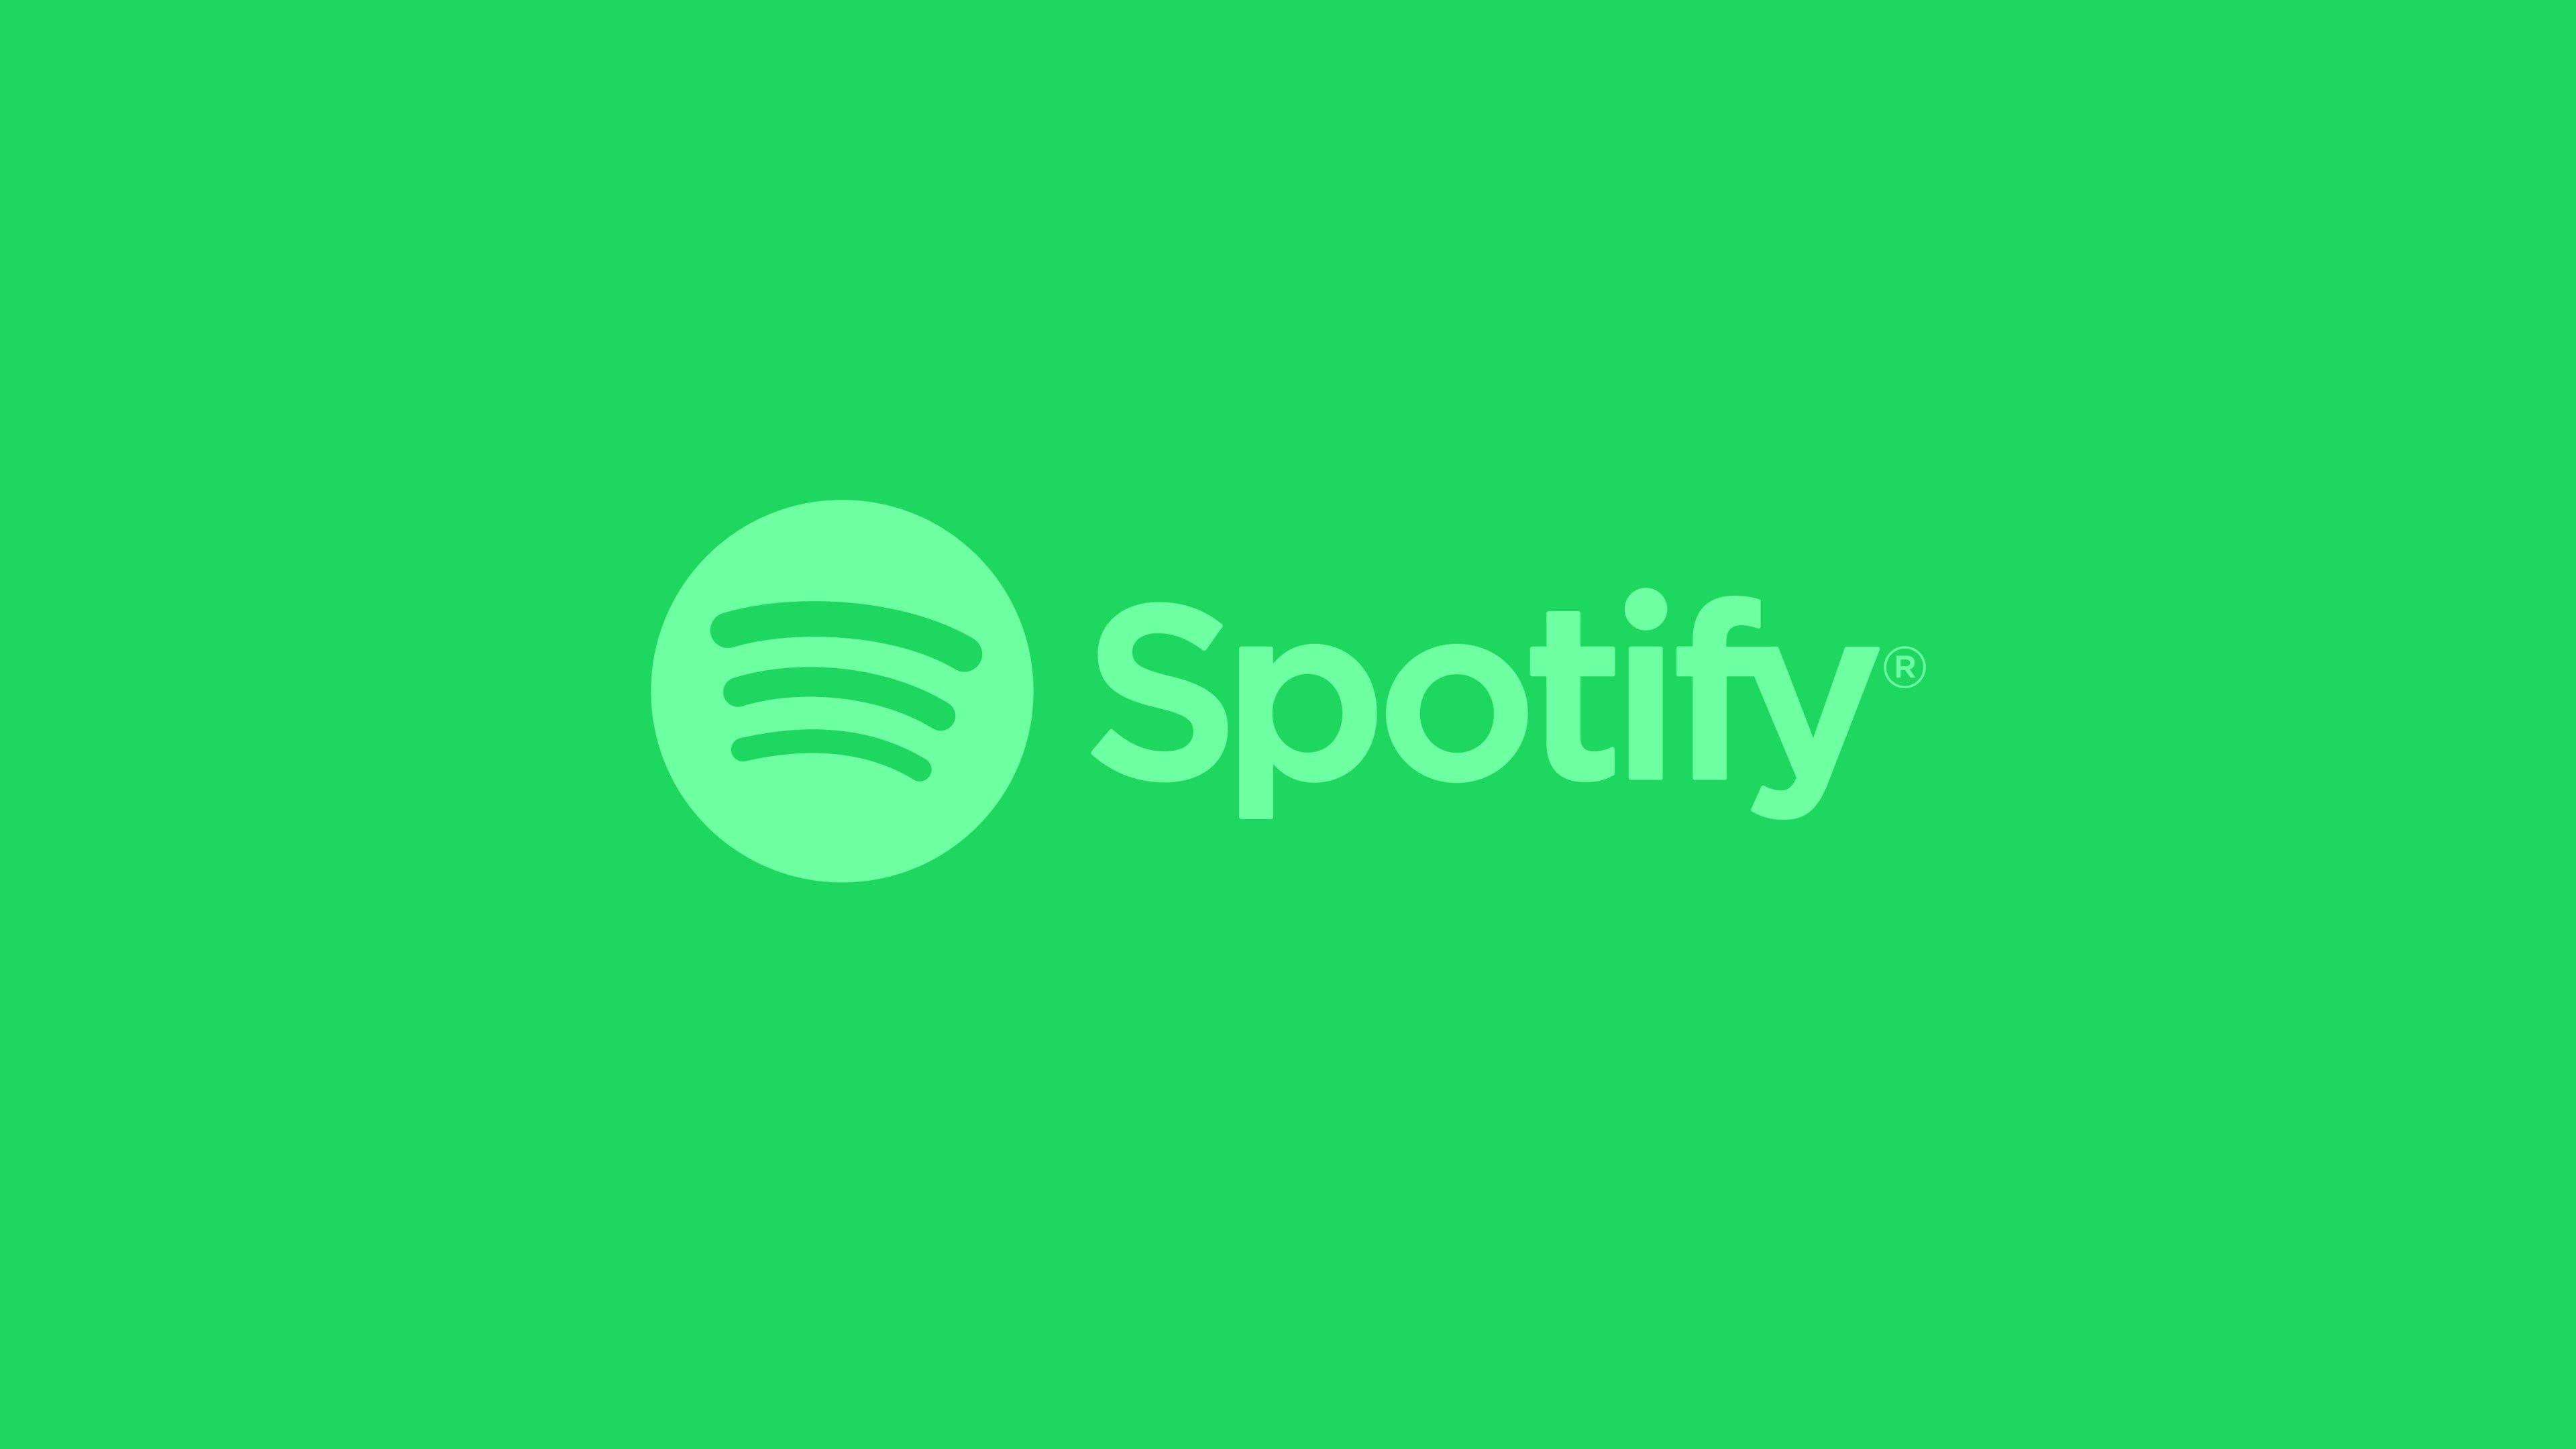 is there a screensaver or visualizer for spotify